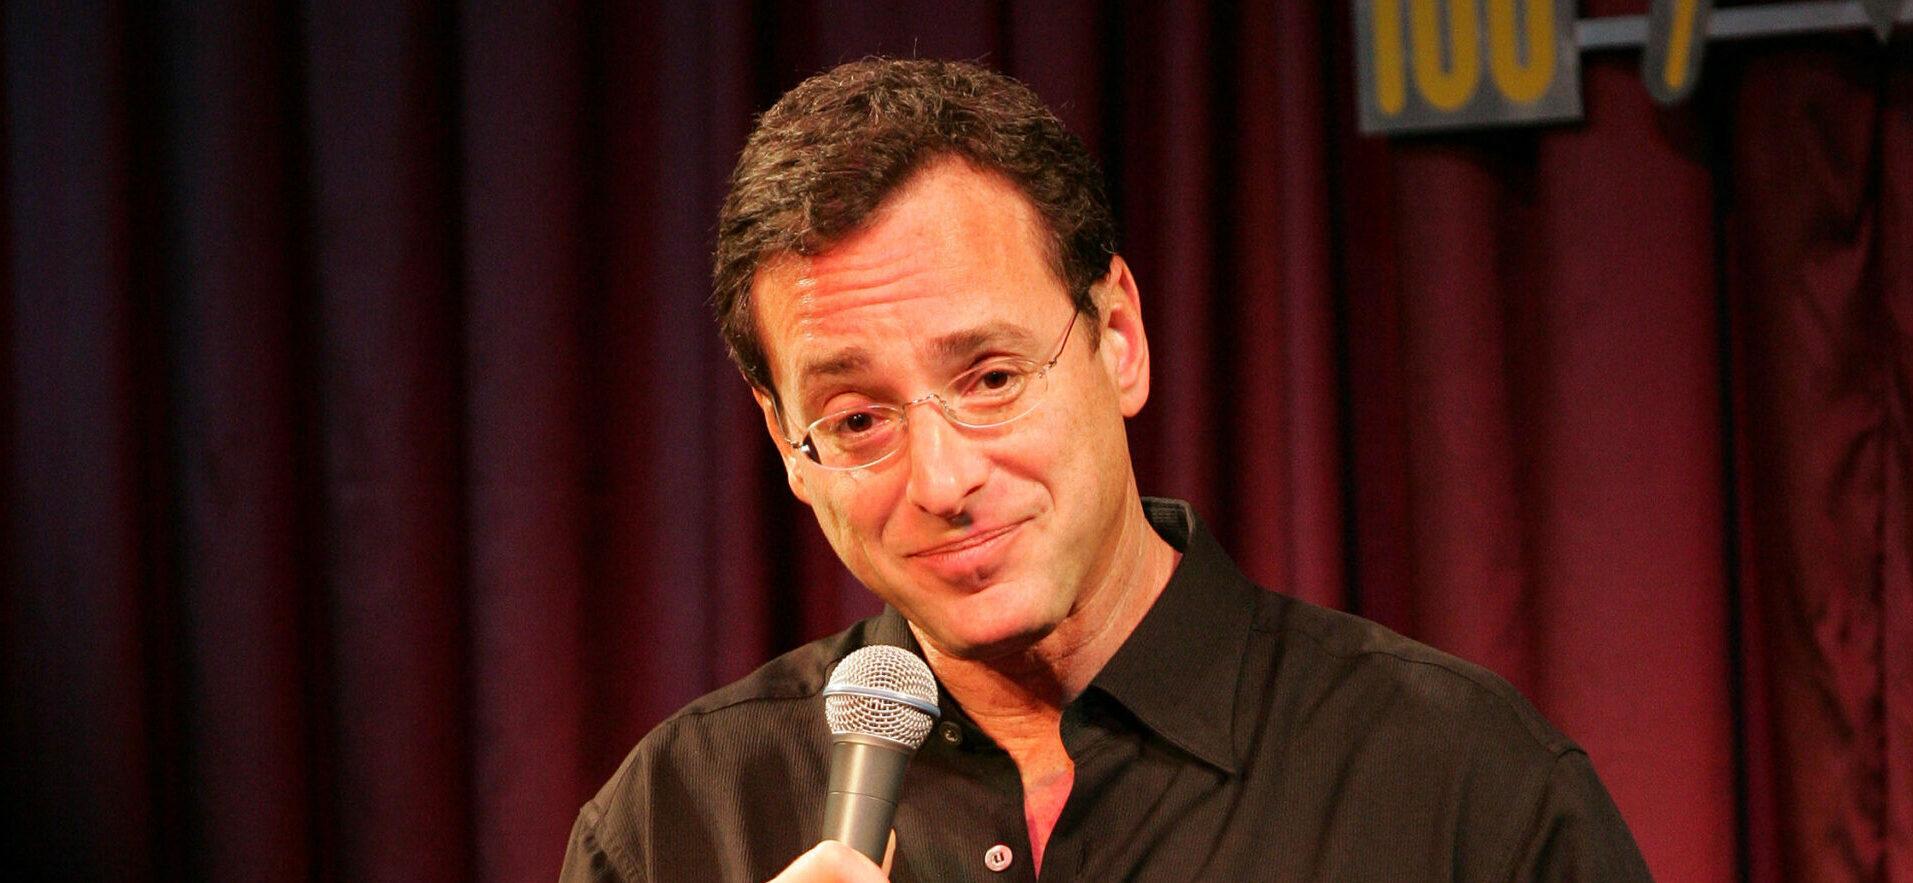 Hollywood Remembers Bob Saget After Tragic Death: ‘A Great Guy And Friend’